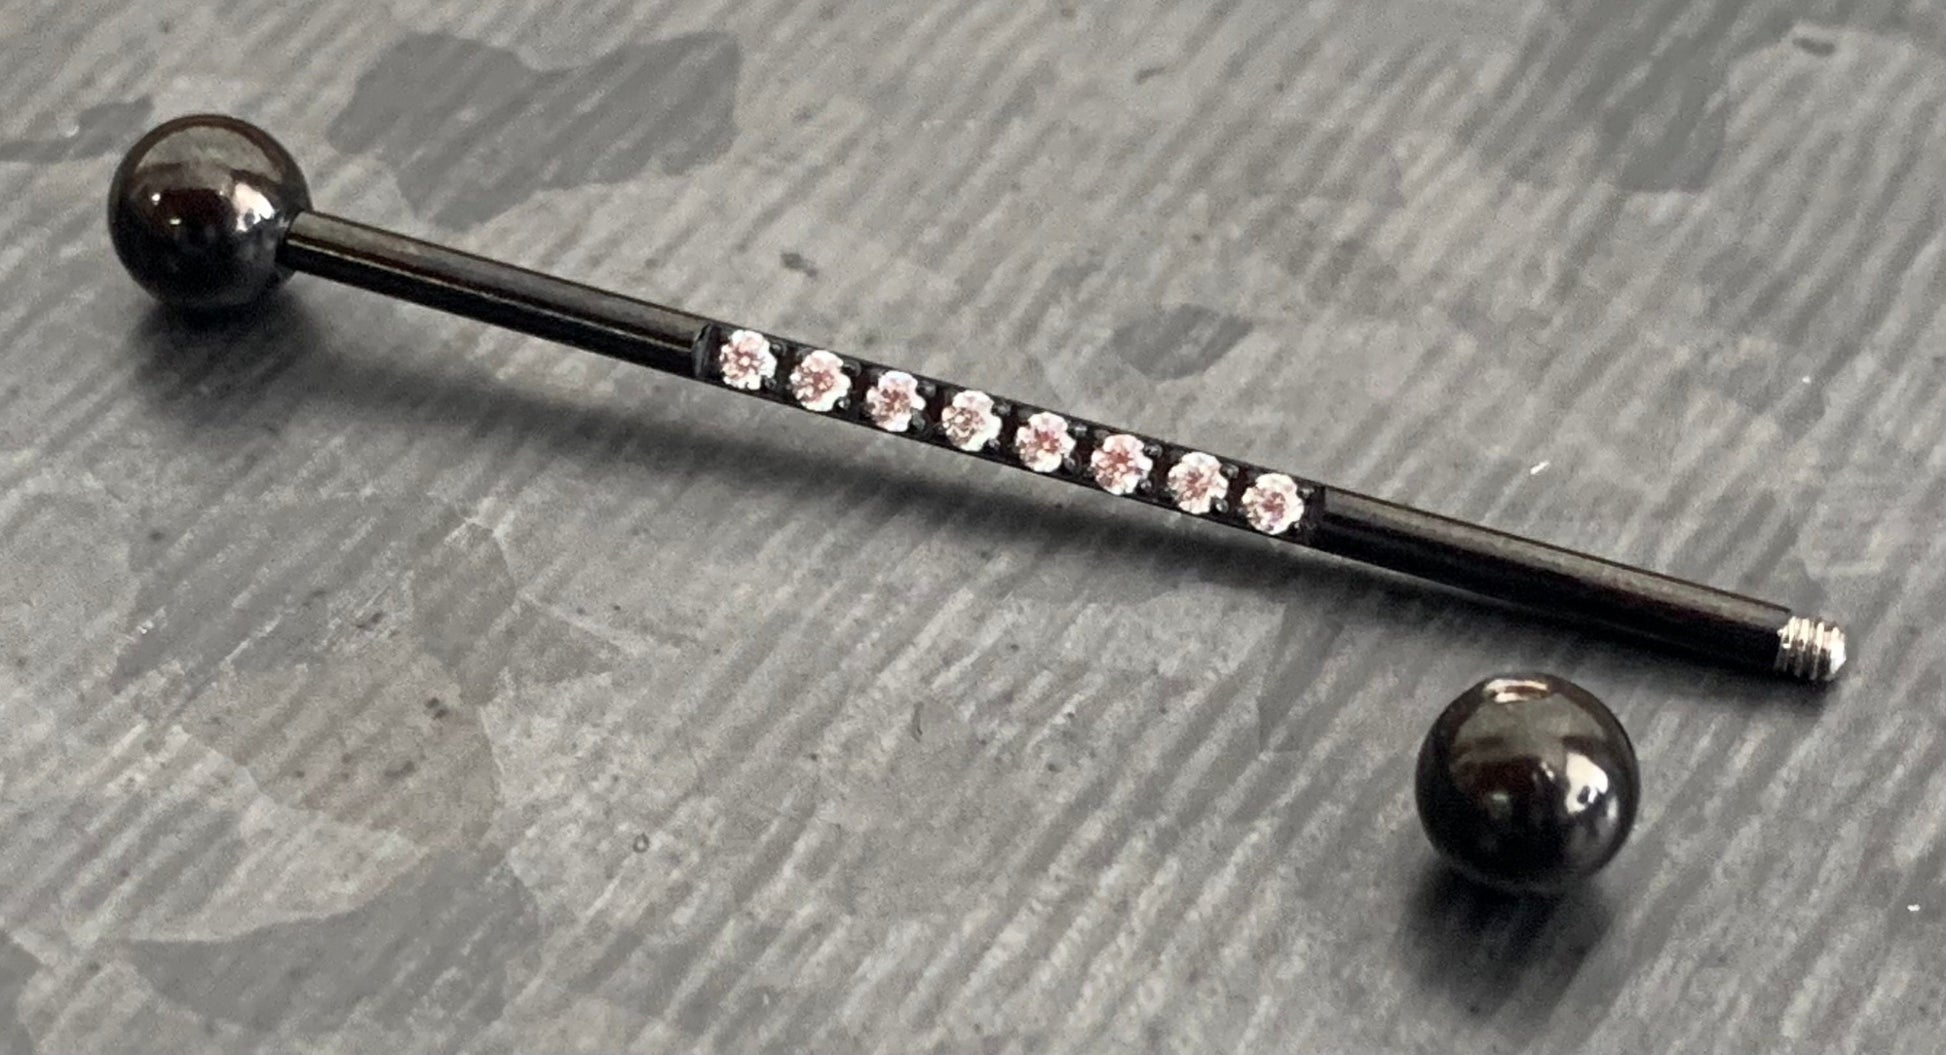 1 Piece Stunning CNC Set Lined CZ Gems Industrial Barbell - 14g, Length 38mm 1.5" - Silver, Black, Gold, Rose Gold and Multi-Color!